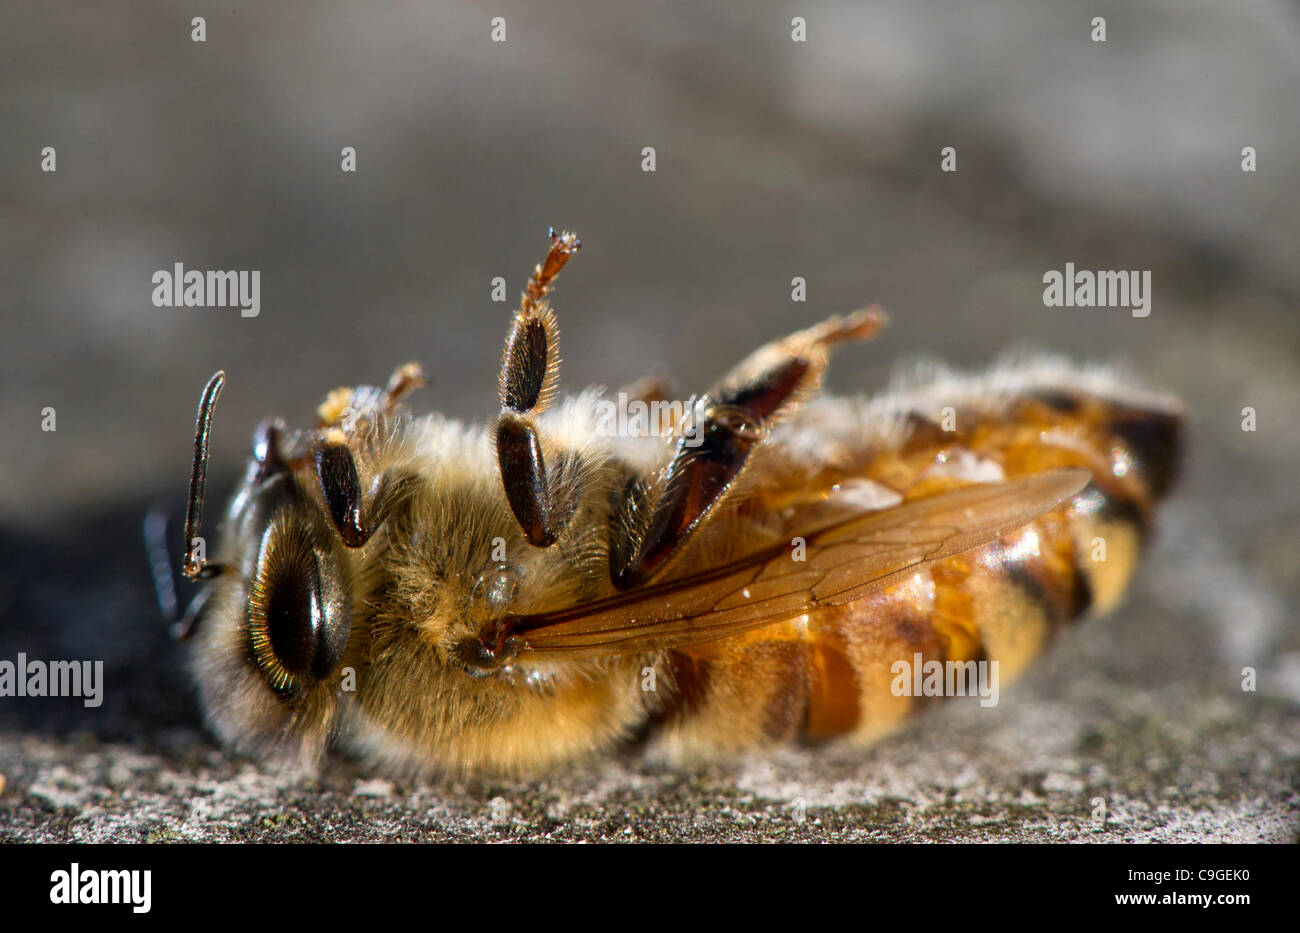 Dec. 23, 2011 - Roseburg, Oregon, U.S - A dead honeybee is seen outside its hive in a orchard on a farm near Roseburg. The cause of death for this bee is not known, but colony collapse disorder continues to be an issue with beehives worldwide. (Credit Image: © Robin Loznak/ZUMAPRESS.com) Stock Photo